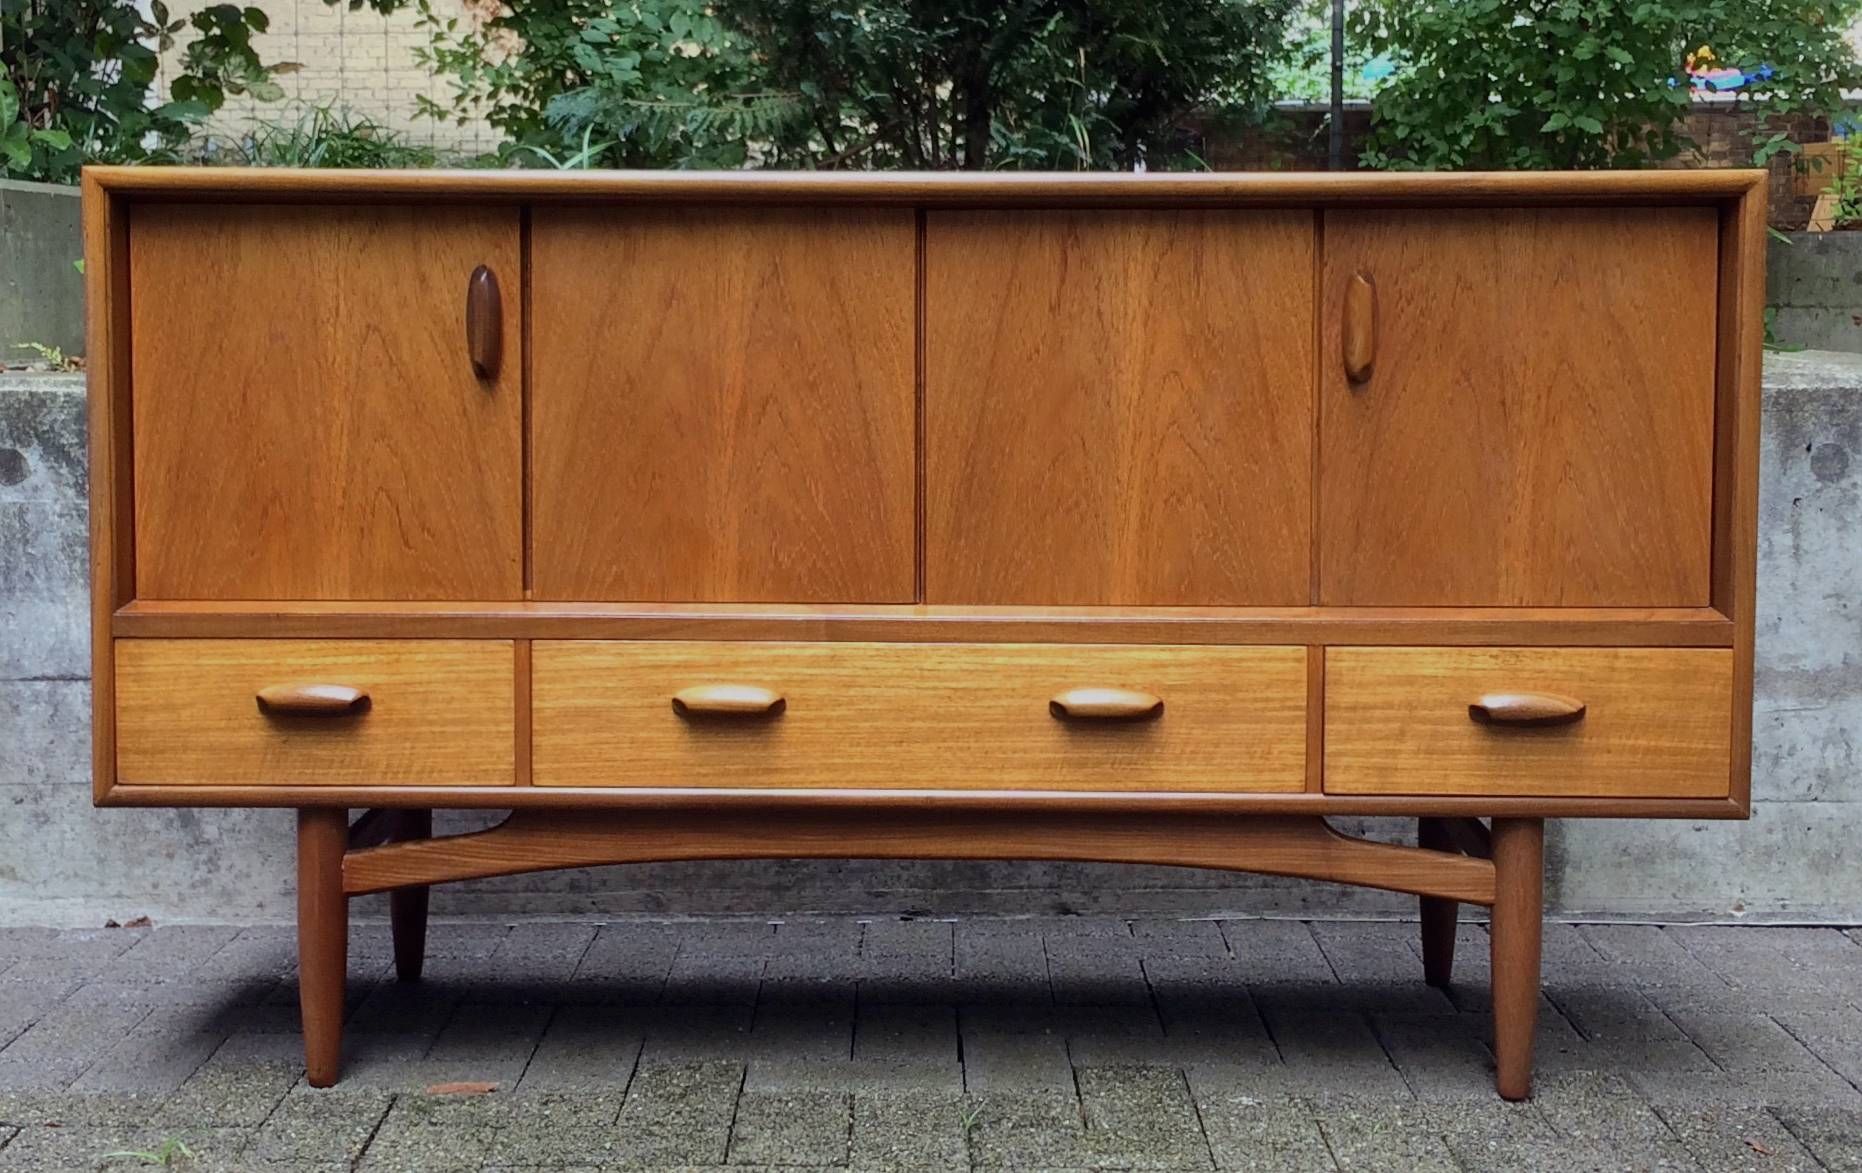 Mid Century Teak Sideboard From The Brasilia Range From G Plan Intended For G Plan Sideboards (View 10 of 15)